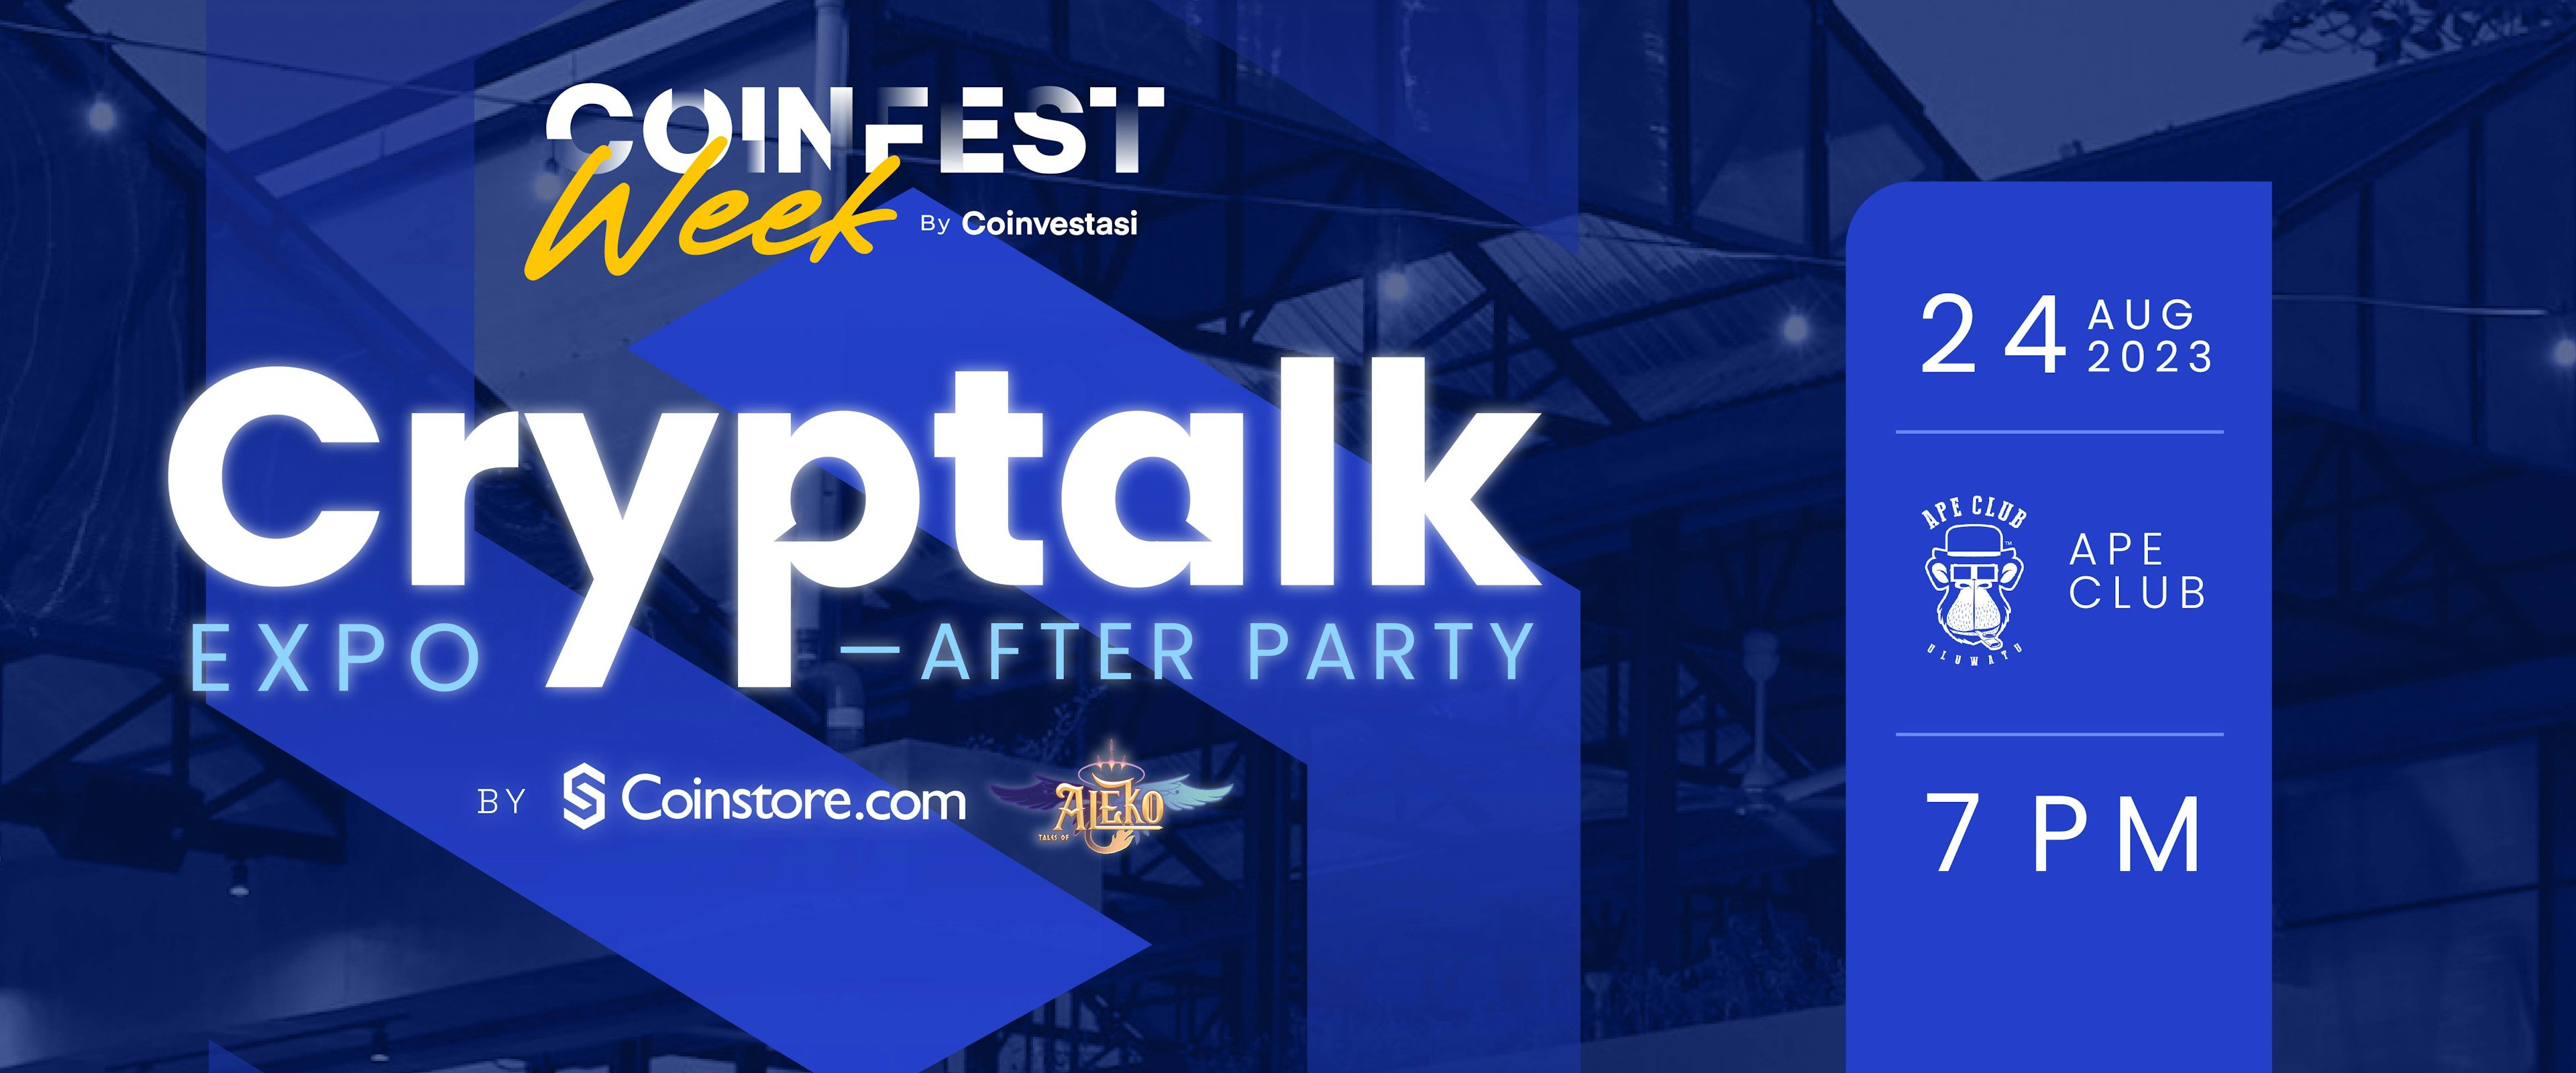 Cryptalk Expo - After Party